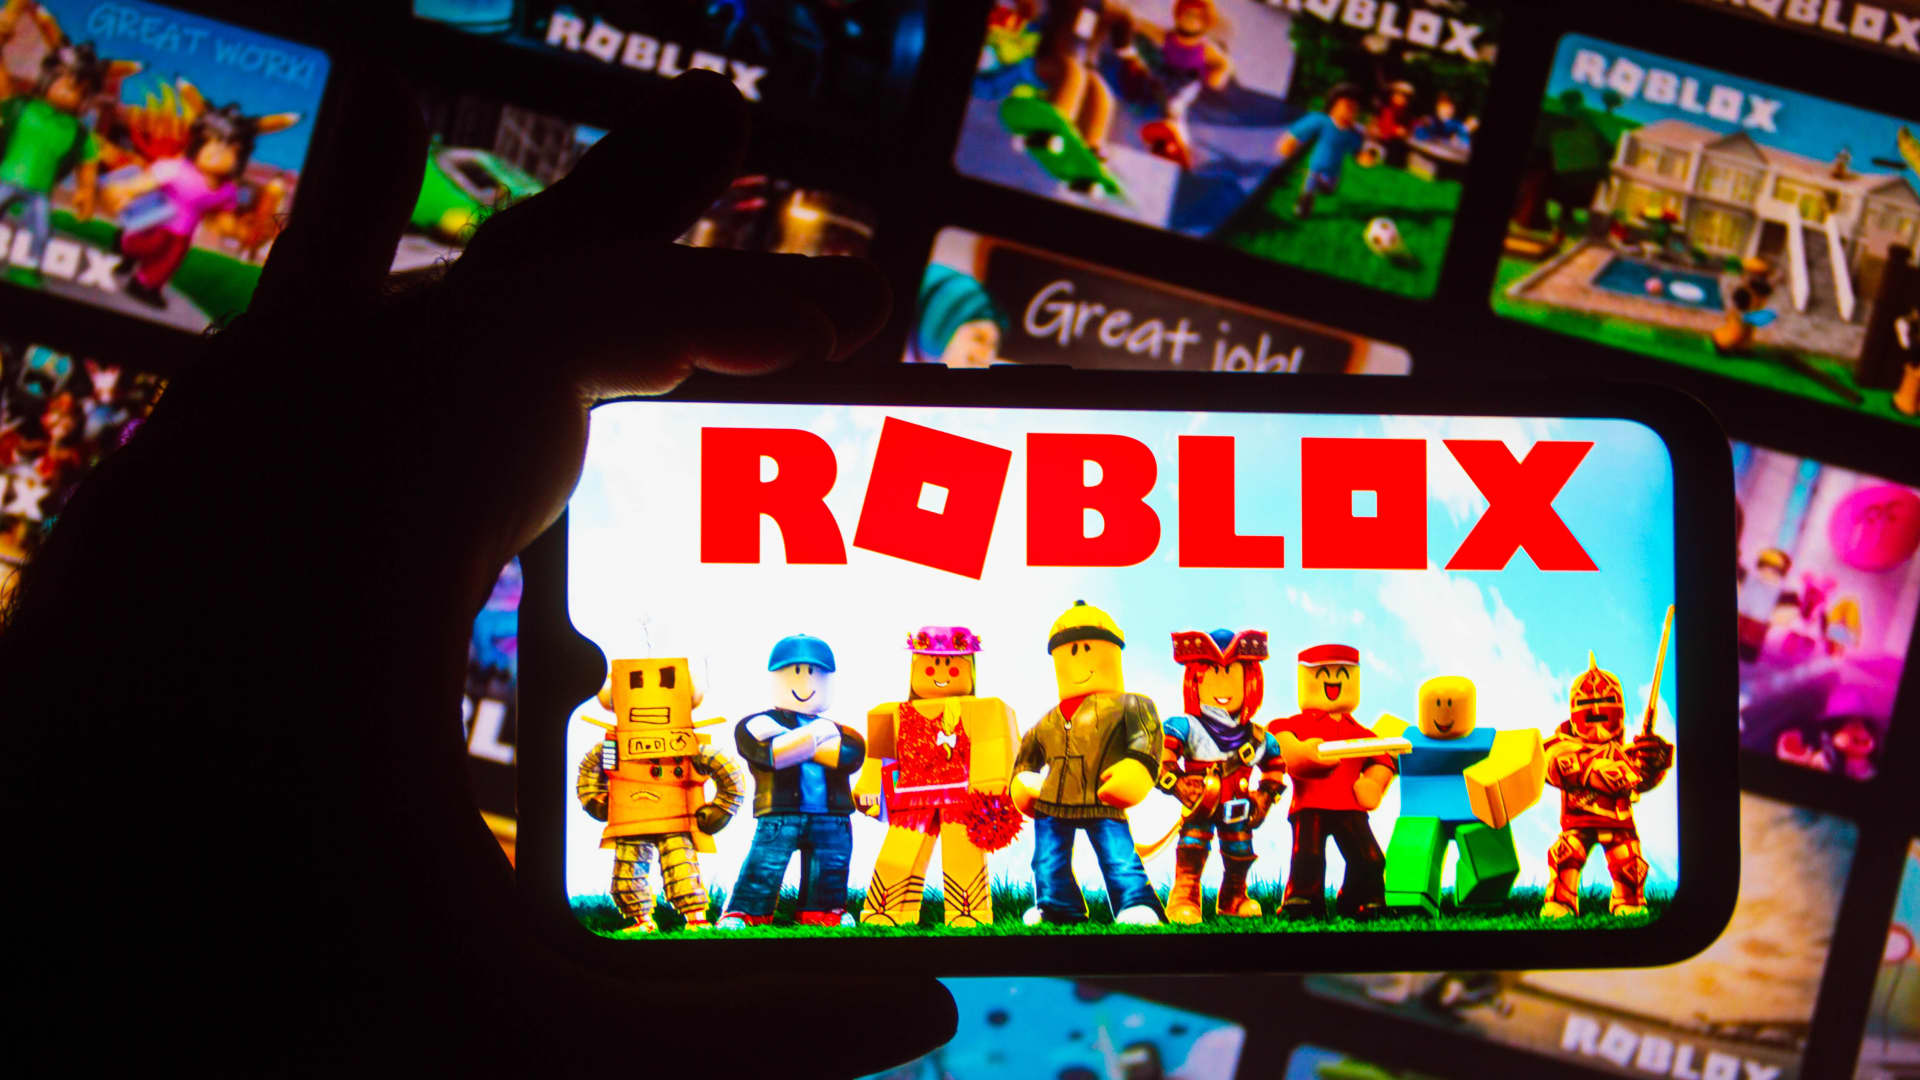 Roblox stock up after December update shows increase in bookings